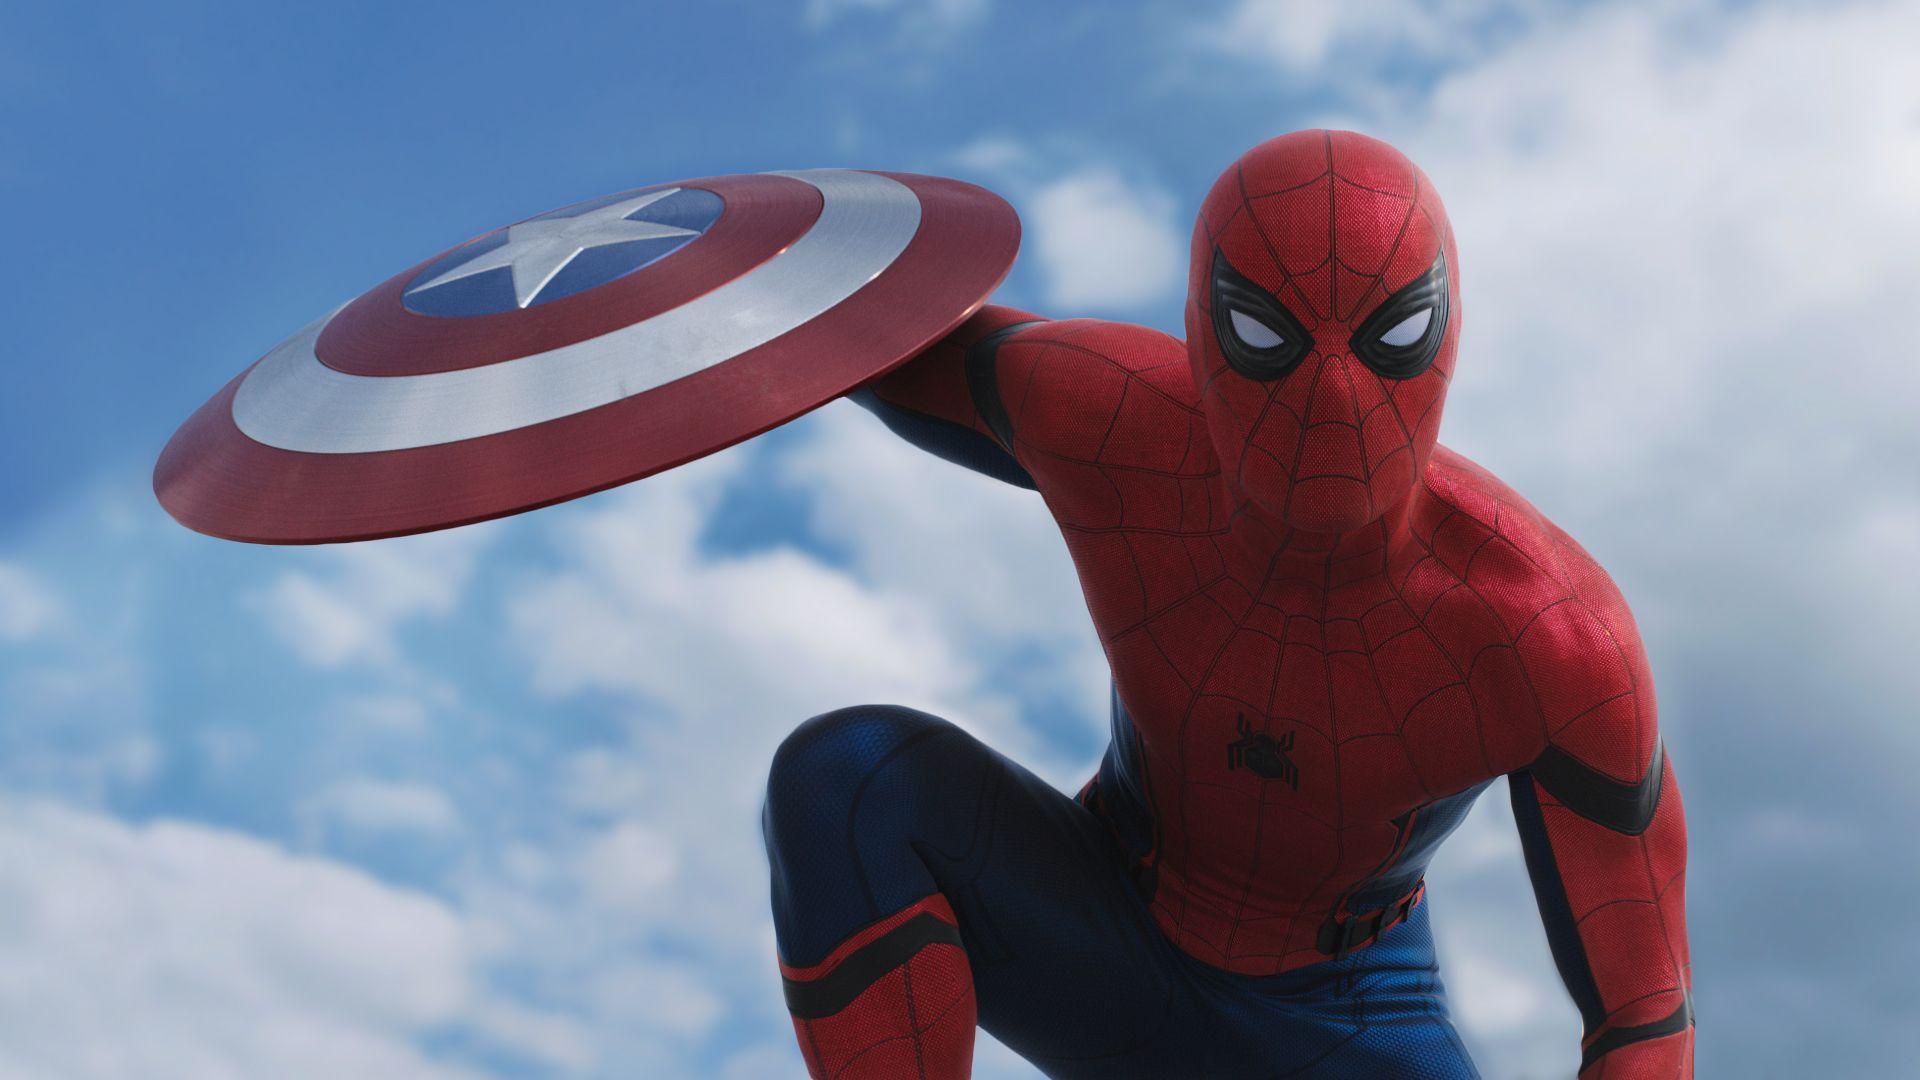 Spider Man May Not Appear In Avengers: Infinity War